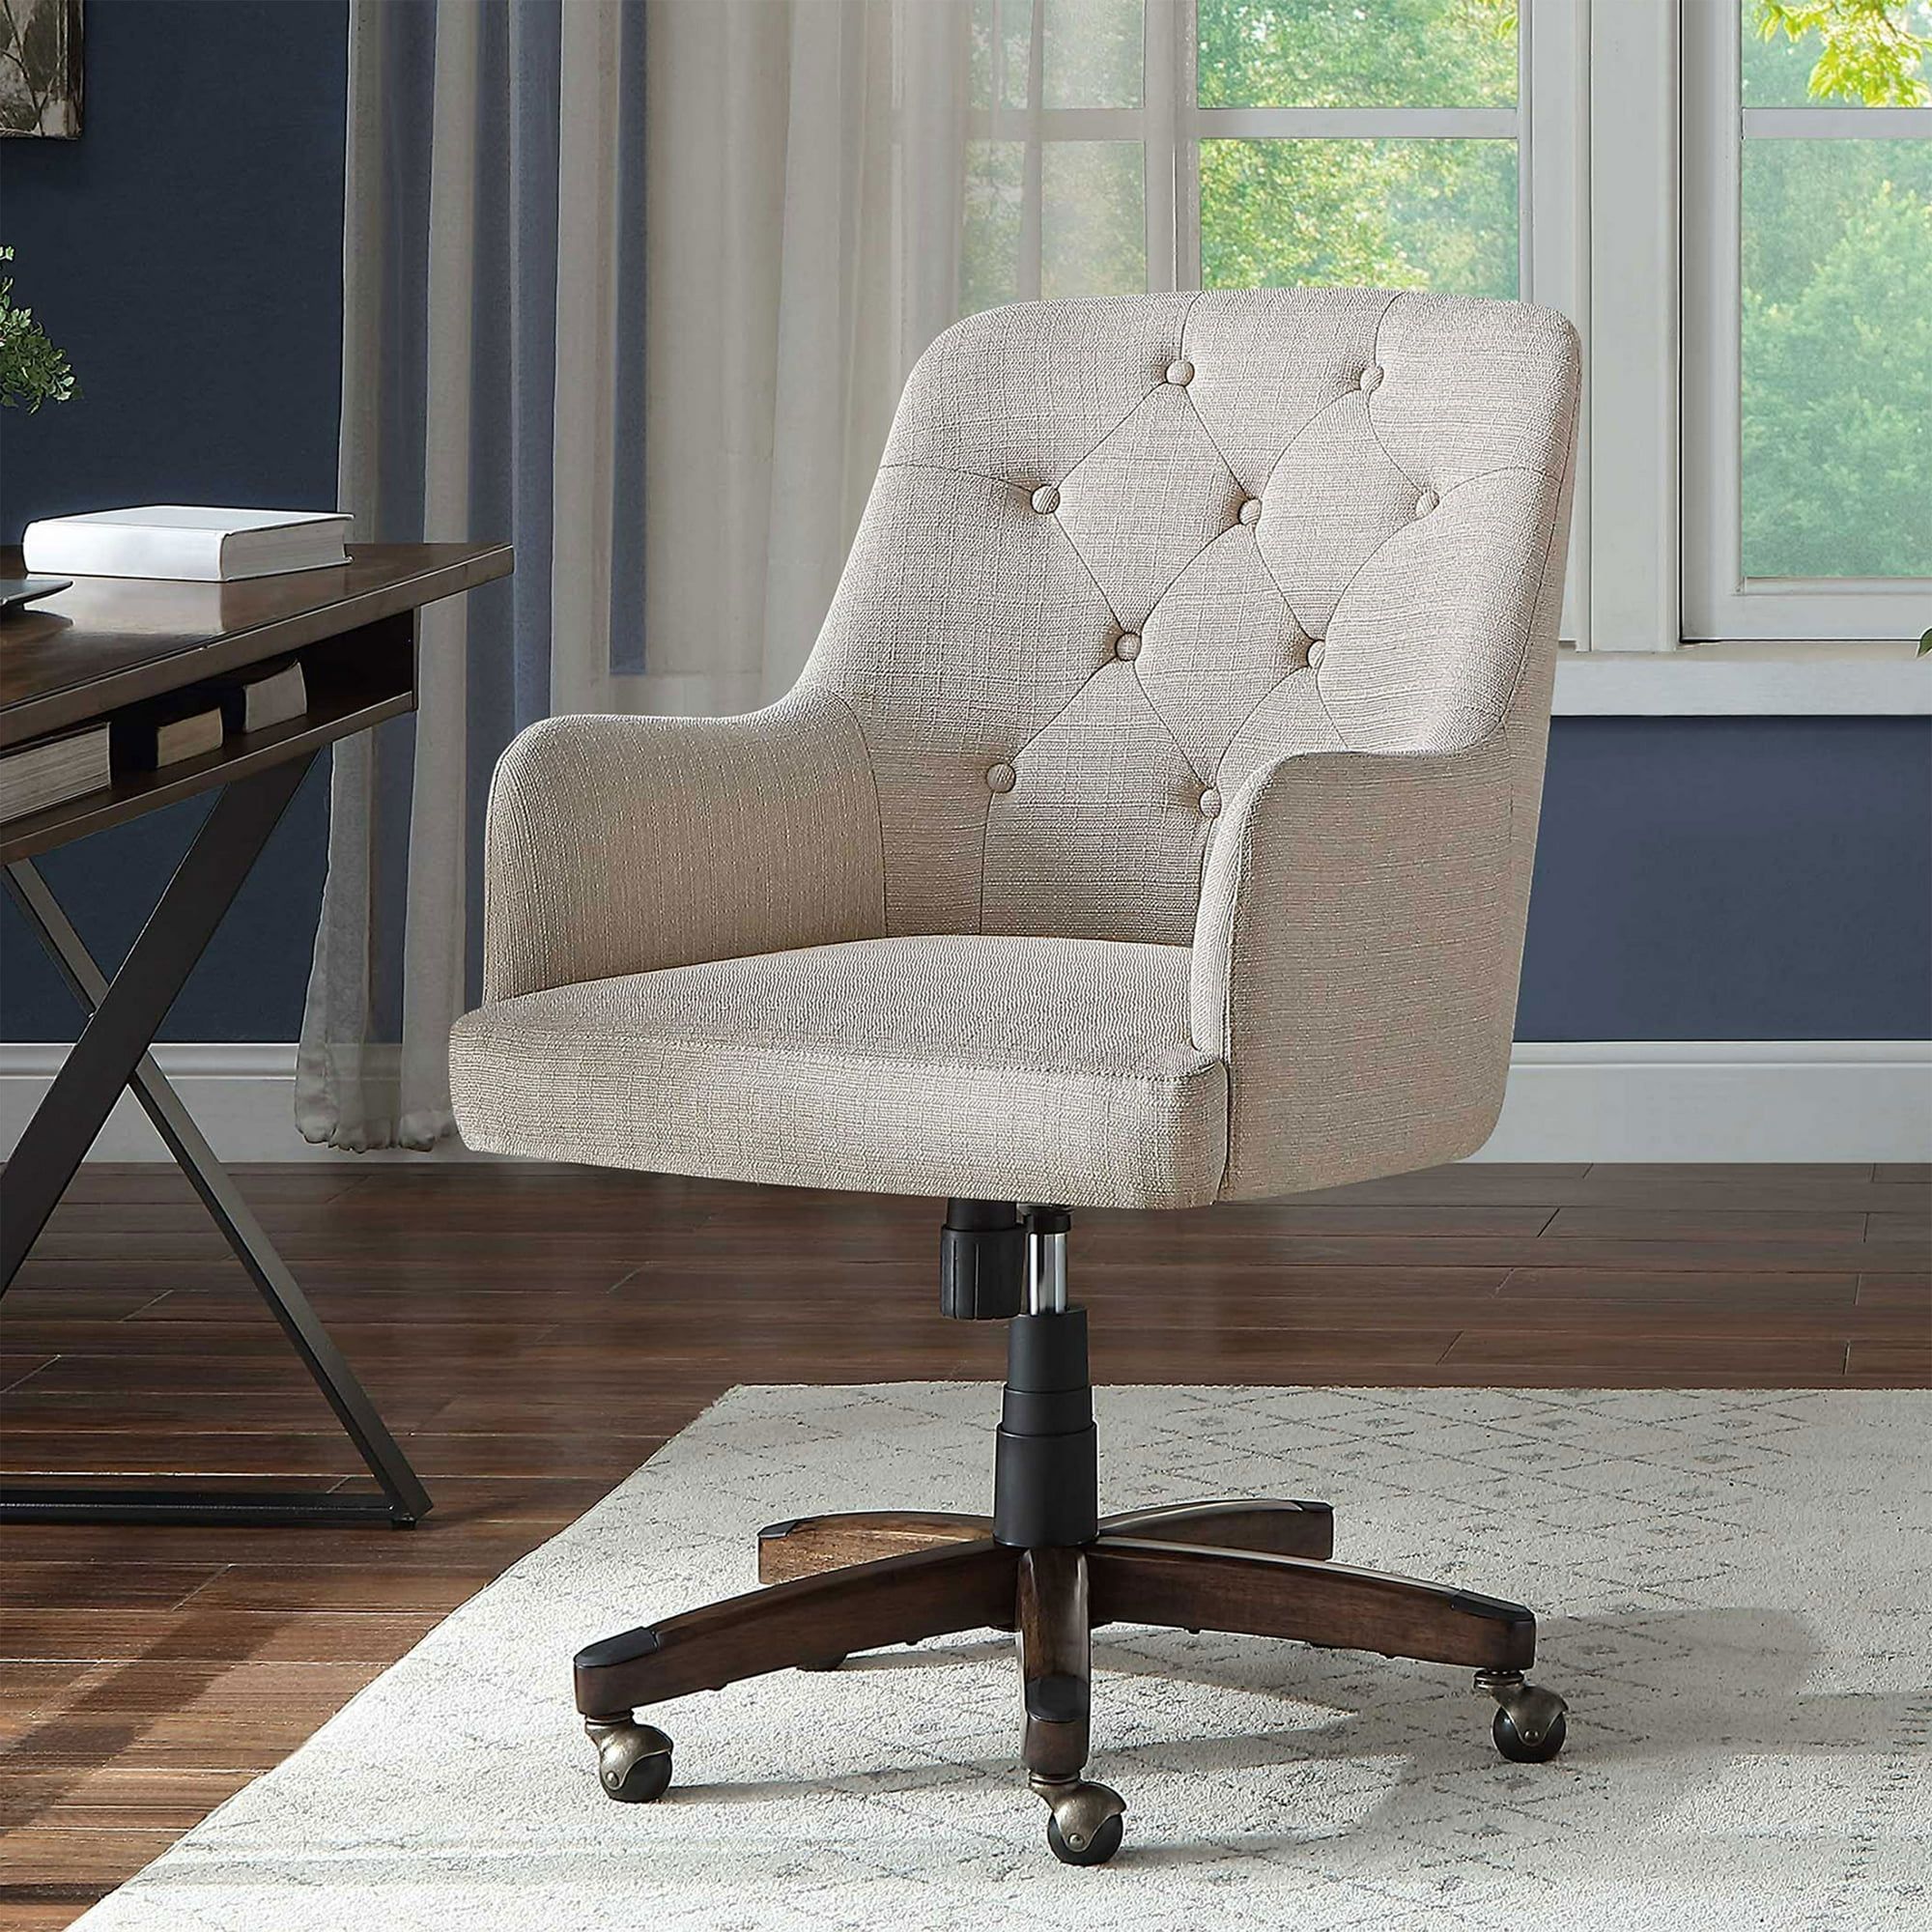 Better Homes & Gardens Tufted Office Chair, Natural Fabric Upholstery and Espresso Wood Base | Walmart (US)